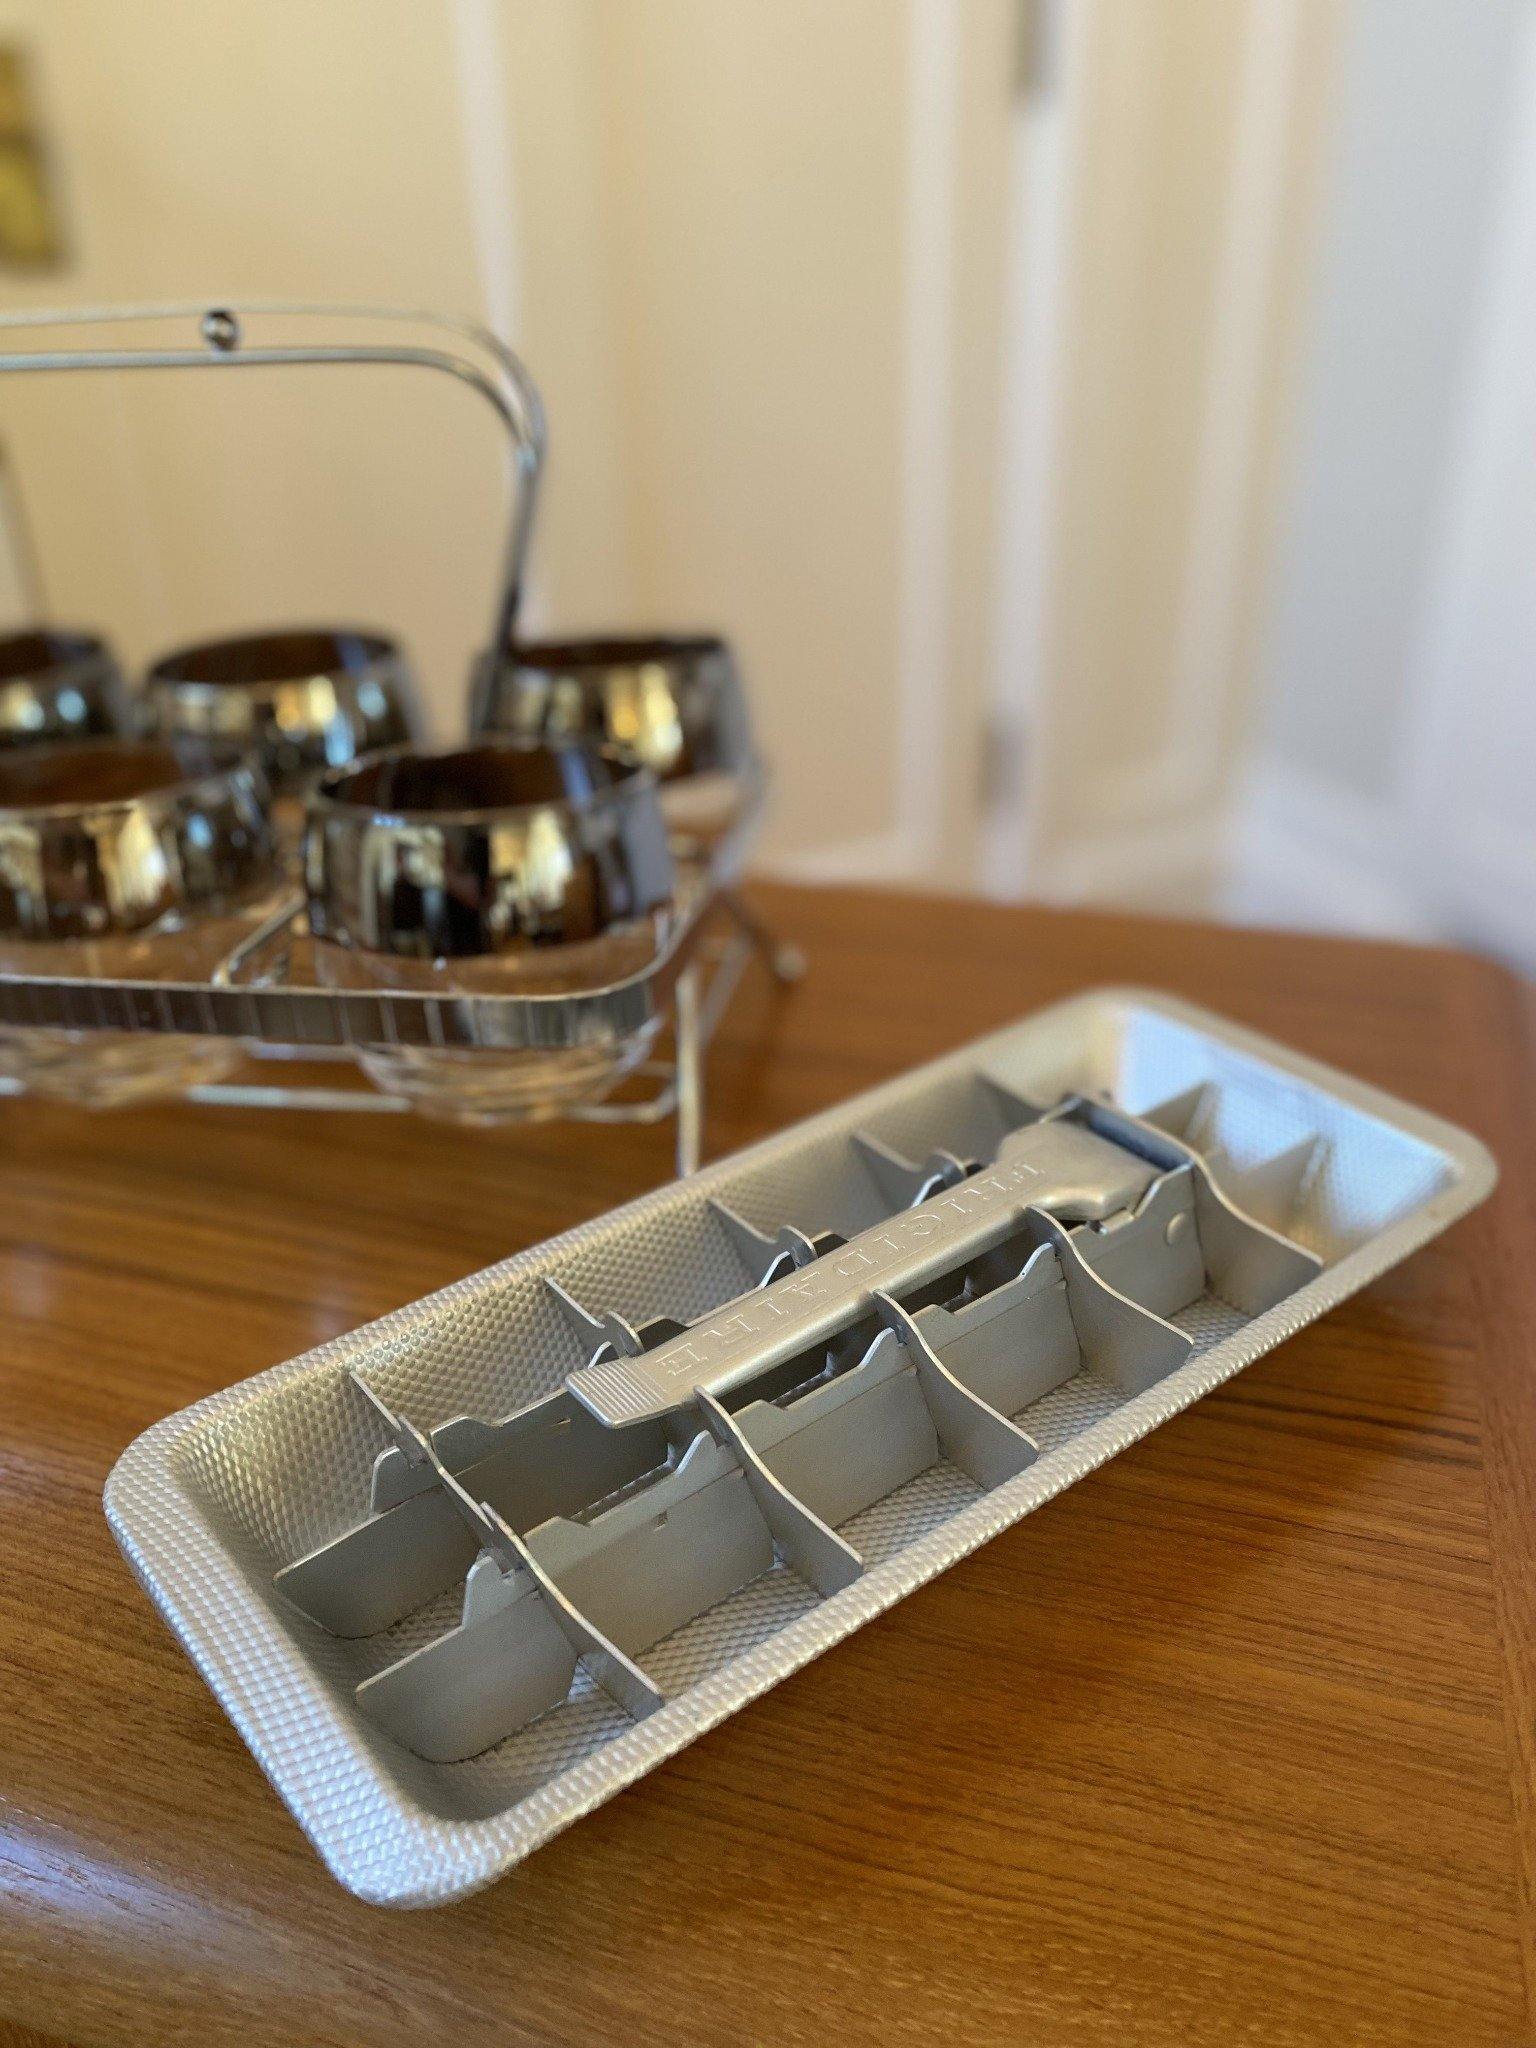 Metal Frigidaire ice cube tray with glasses in background- Cook Street Vintage